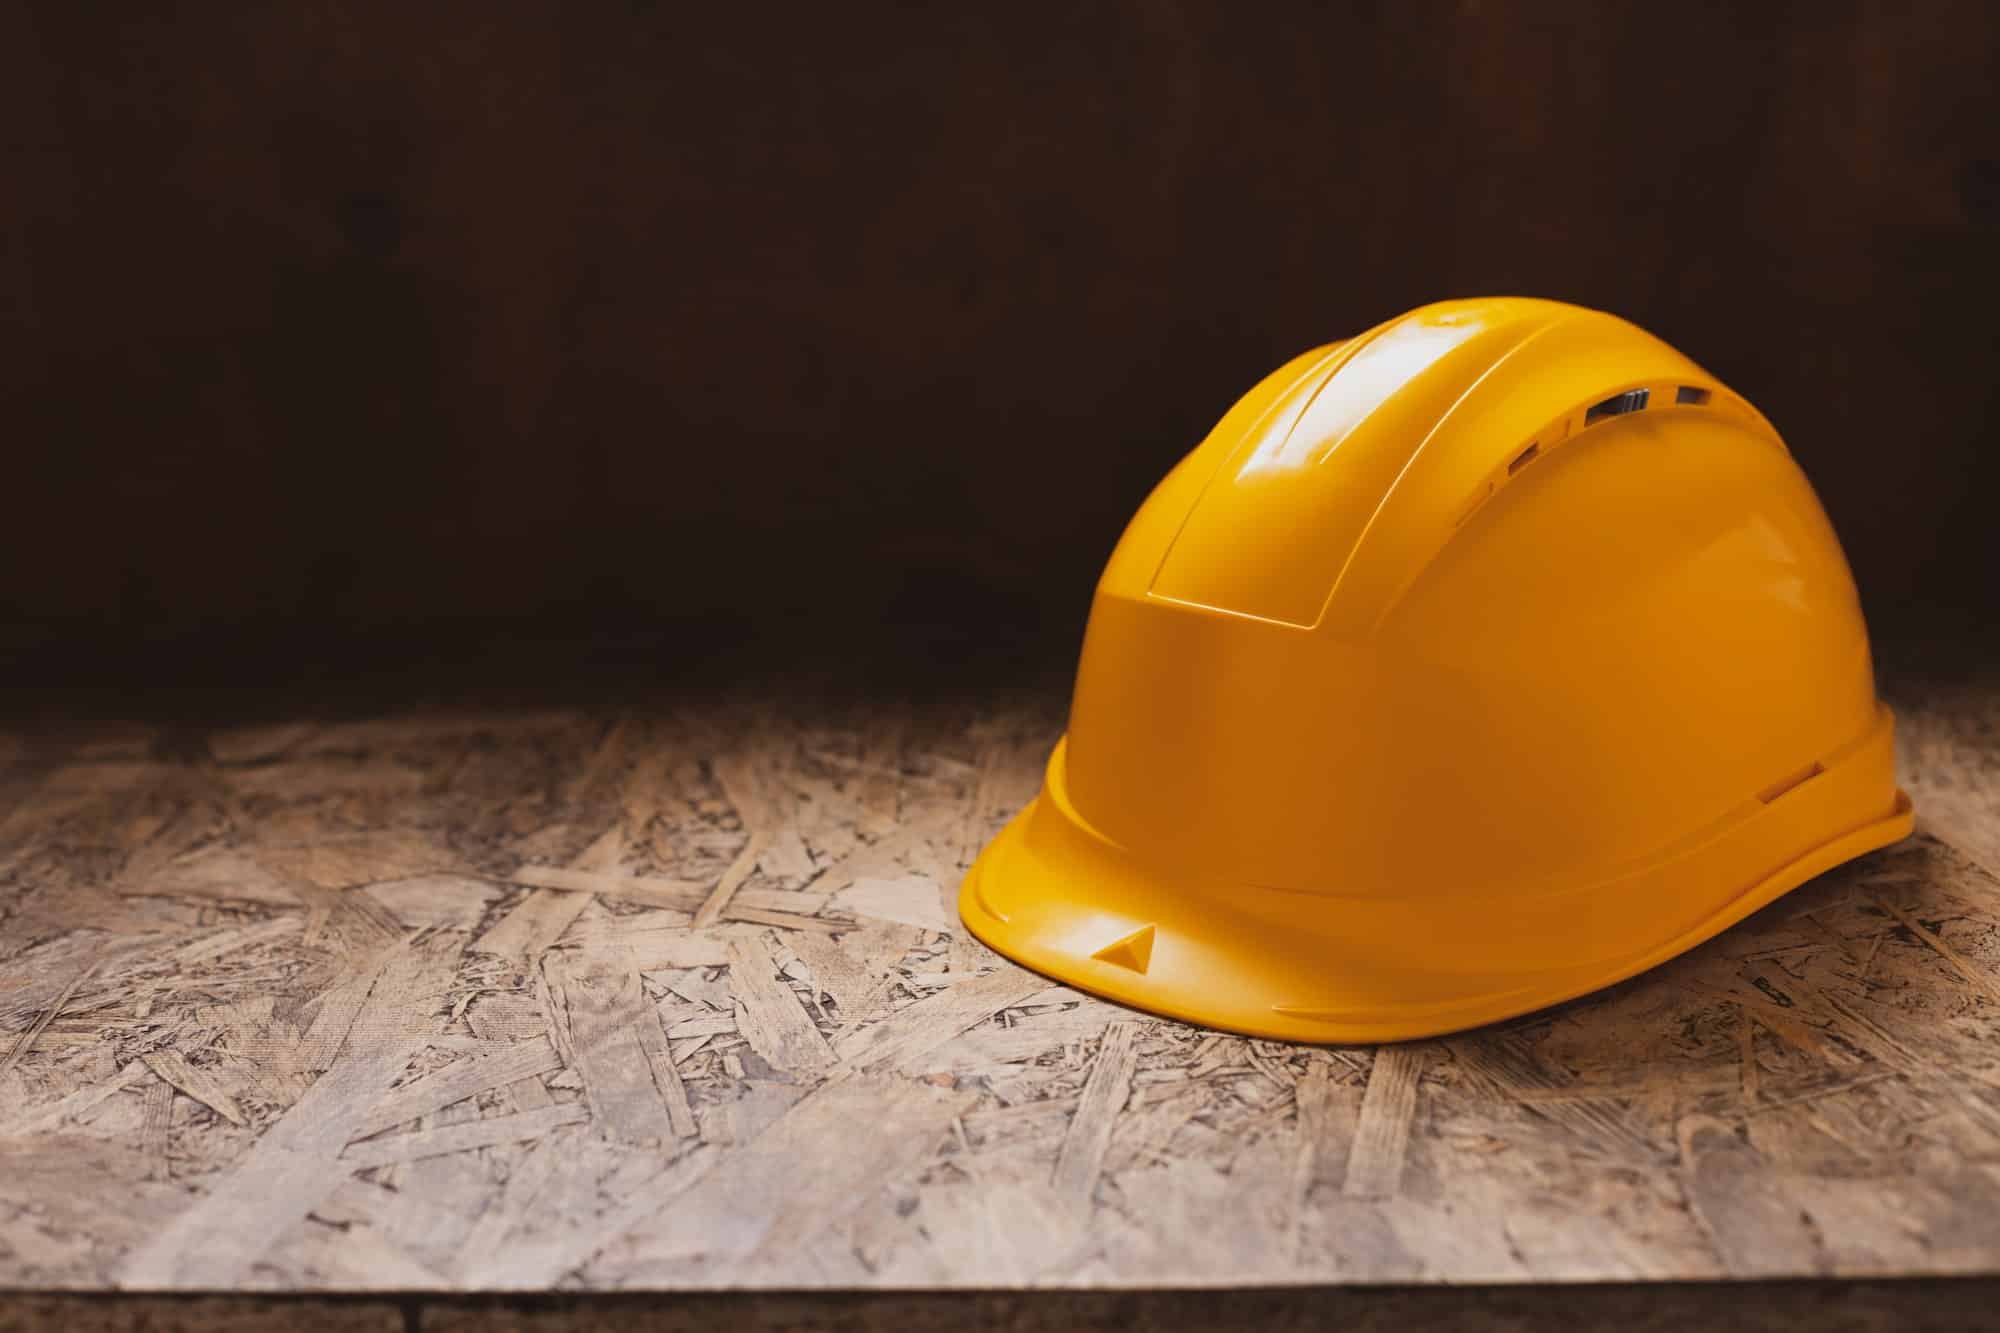 Construction helmet at wooden table background texture. Work cap and concept of renovation